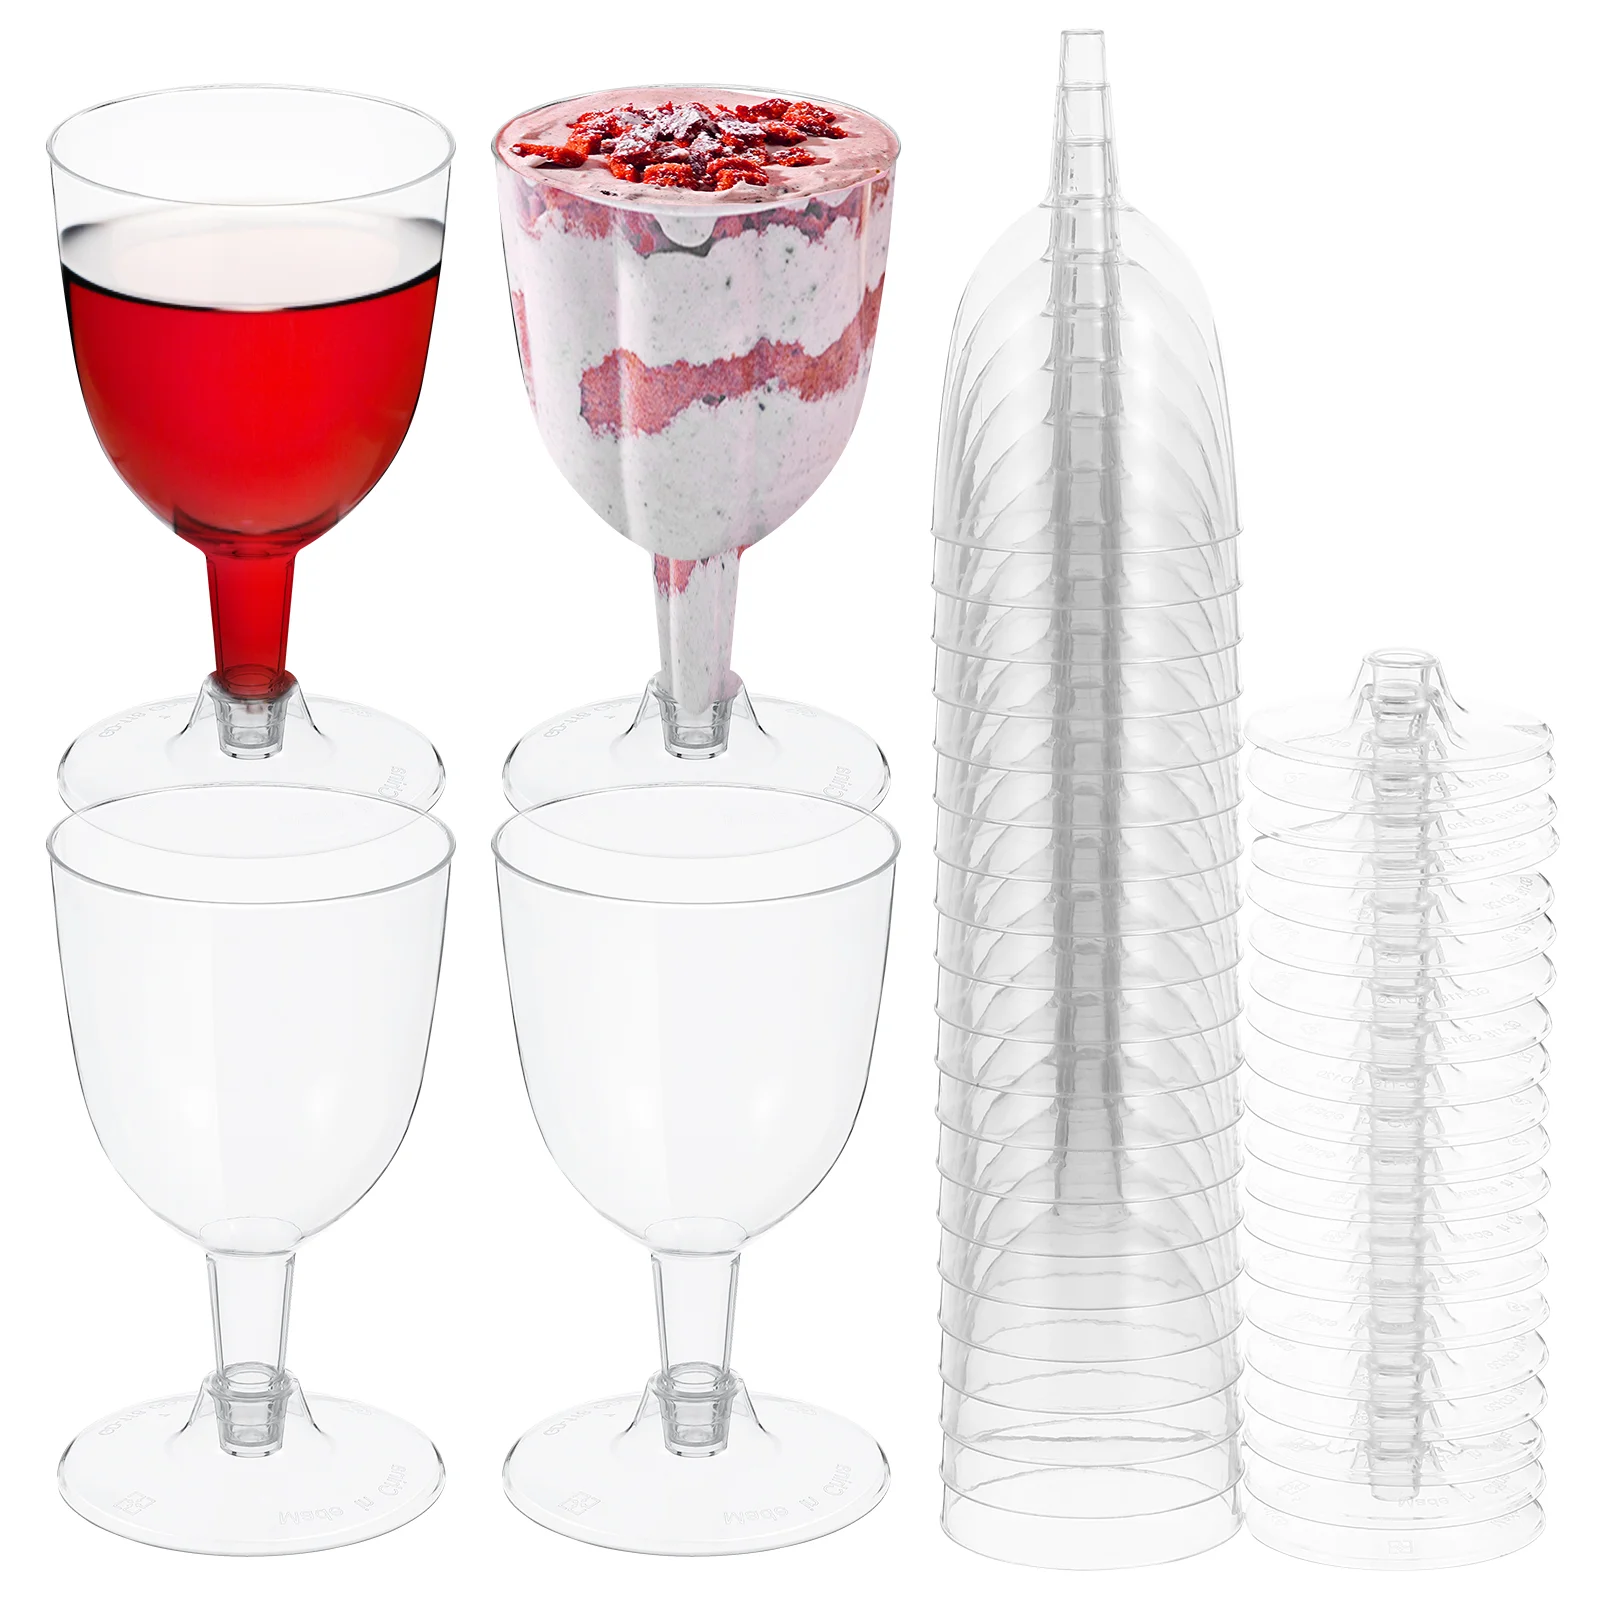 

20 Pcs Ice Cream Pudding Cups Mousse Ice-cream Disposable Clear Plastic Toasting Goblets Party Glasses For parties Desserts